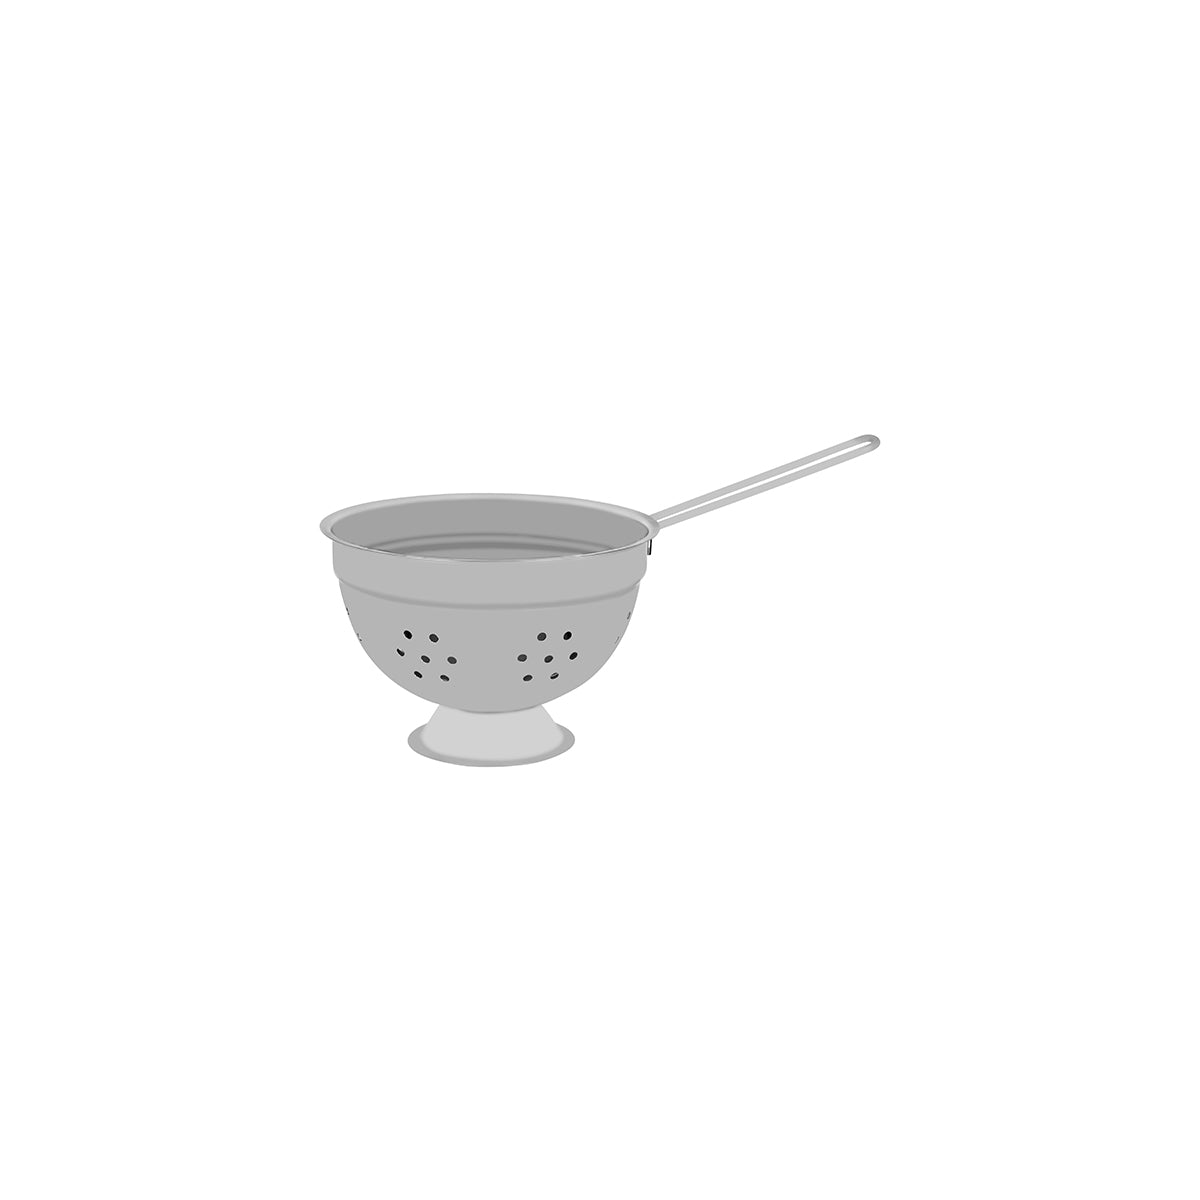 MINI-08220 Chef Inox Miniatures Colander Stainless Steel with Long Handle 120x90mm Tomkin Australia Hospitality Supplies